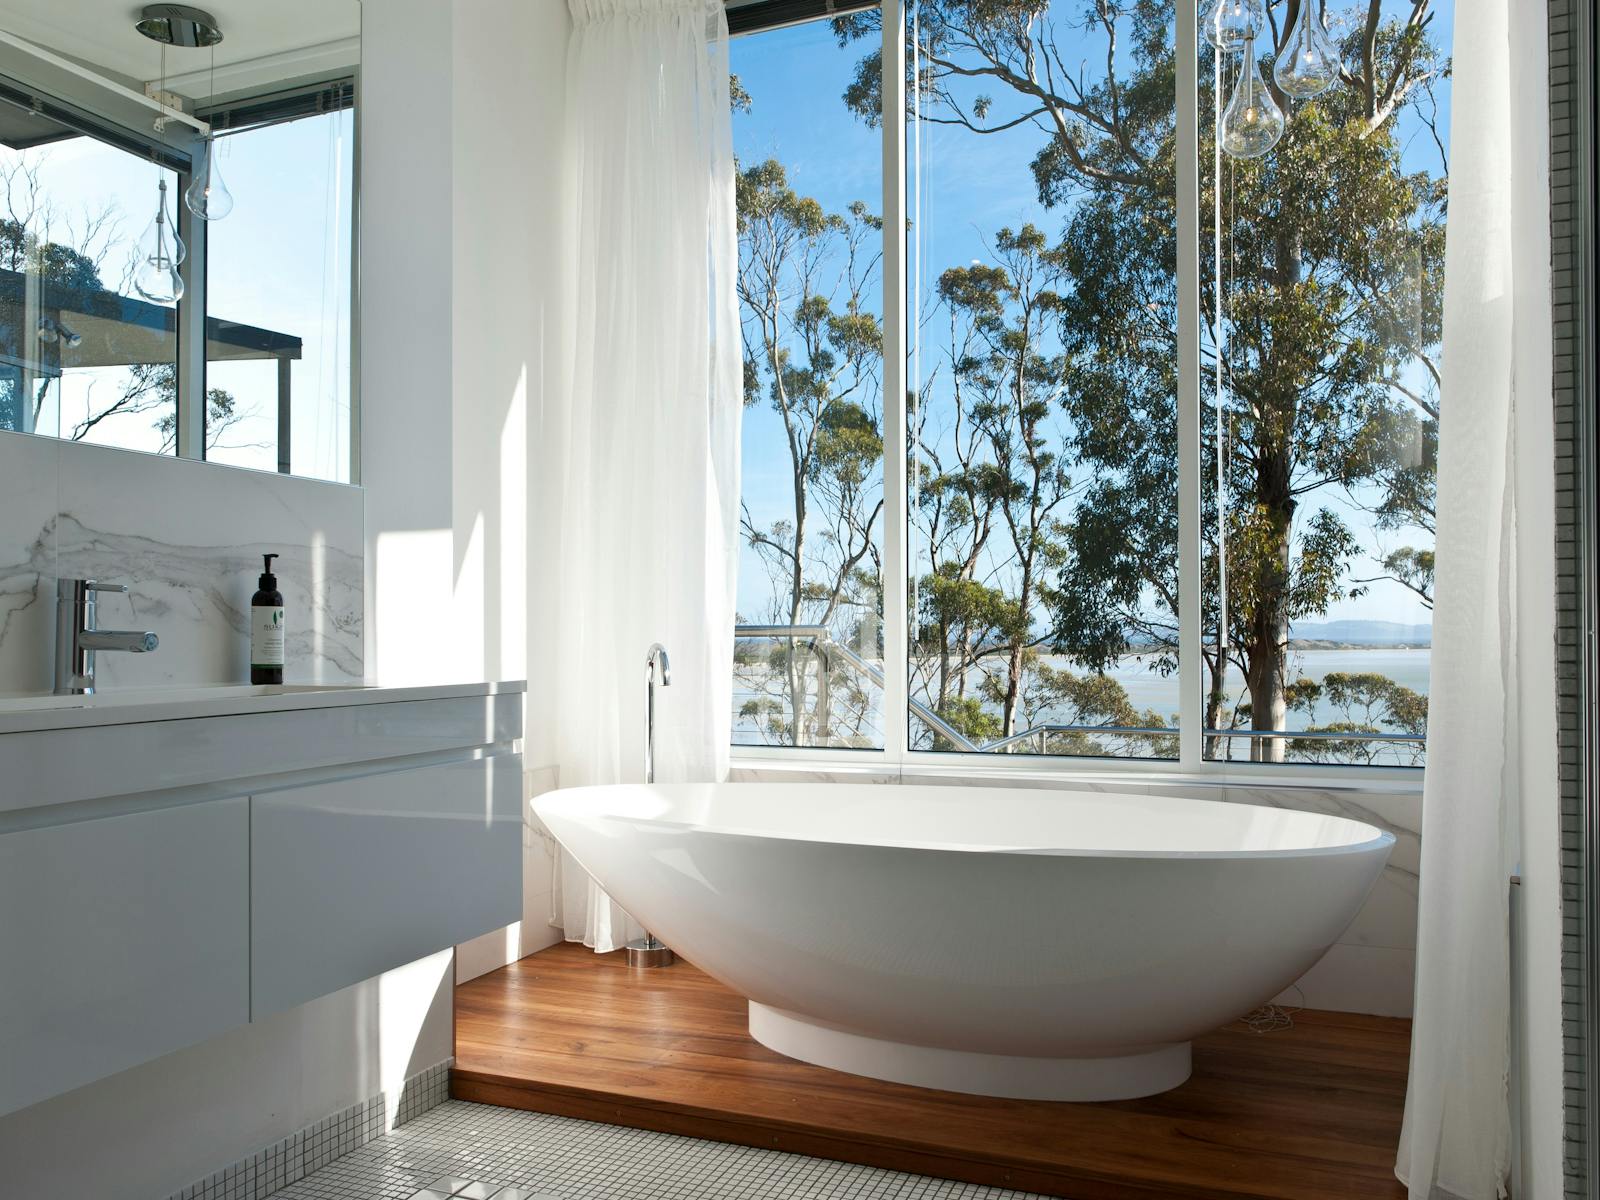 Even the bathroom has a view! Enjoy a relaxing soak at the end of the day whilst watching the stars!